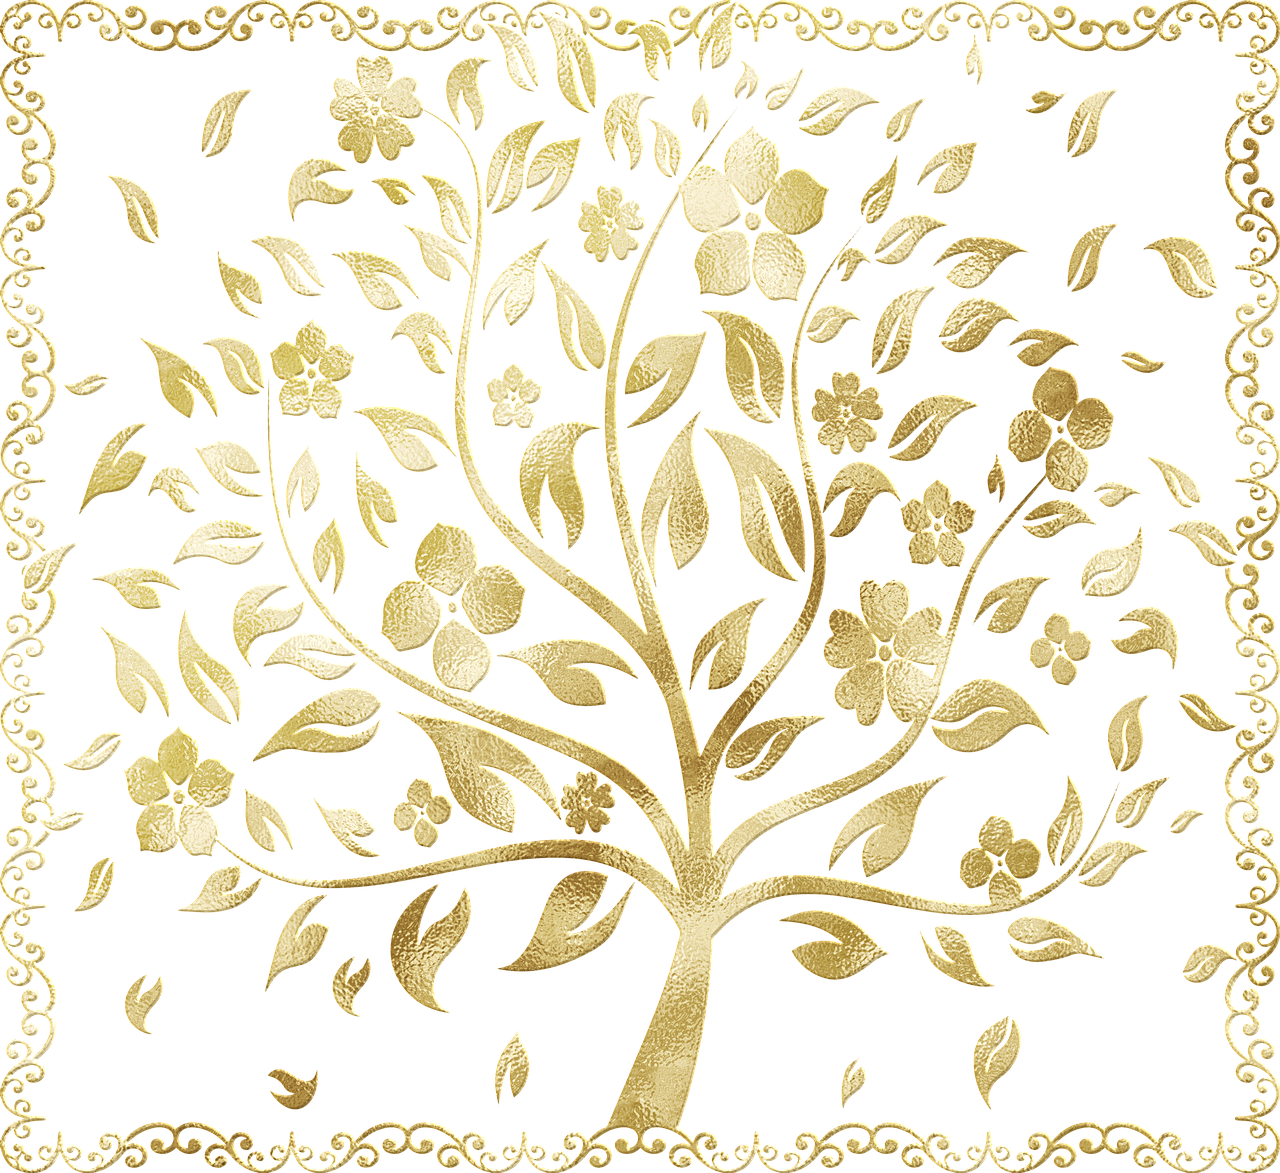 a golden tree of life on a black background, a digital rendering, inspired by Master of the Embroidered Foliage, shutterstock, art nouveau, decorative border, persian folkore illustration, golden background with flowers, under the soft shadow of a tree